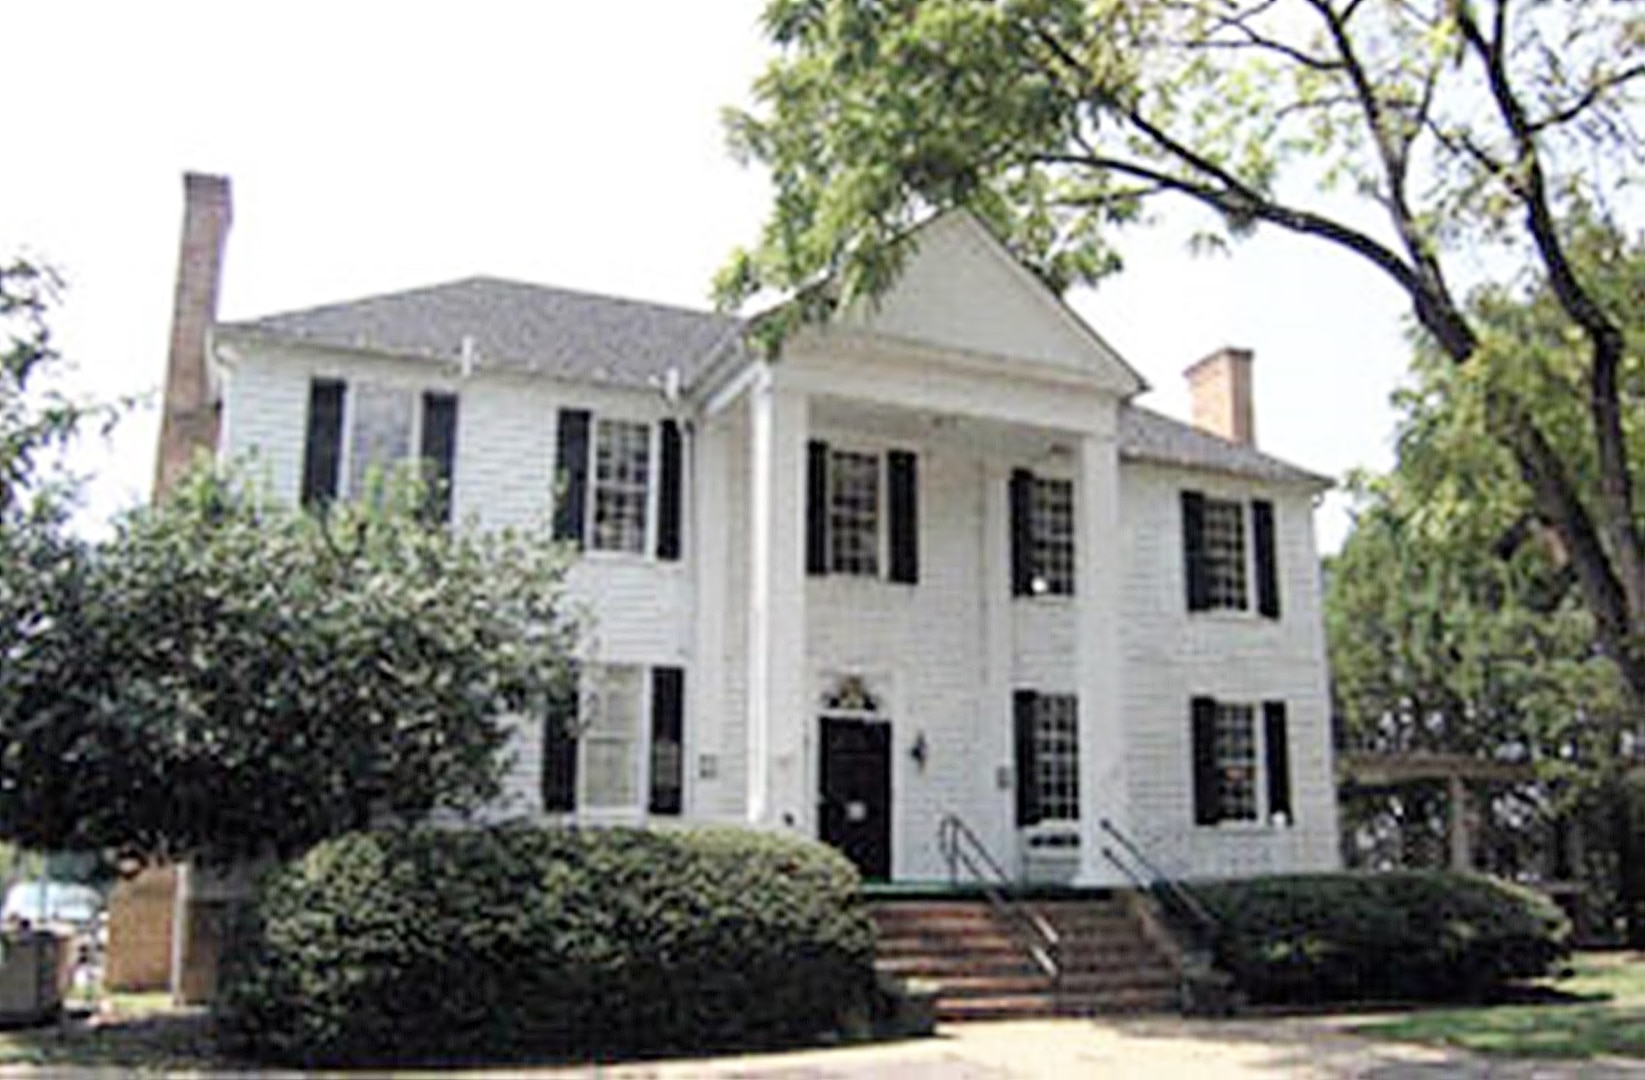 Norfolk District, U.S. Army Corps of Engineers is managing a $3.28 million restoration of Bellwood Manor House at the military supply depot in Richmond, Virginia. The house has been listed on the National Register of Historic Places since 1978. Restoration work is expected to begin later this month and the project should be completed in a year. (Courtesy photo)